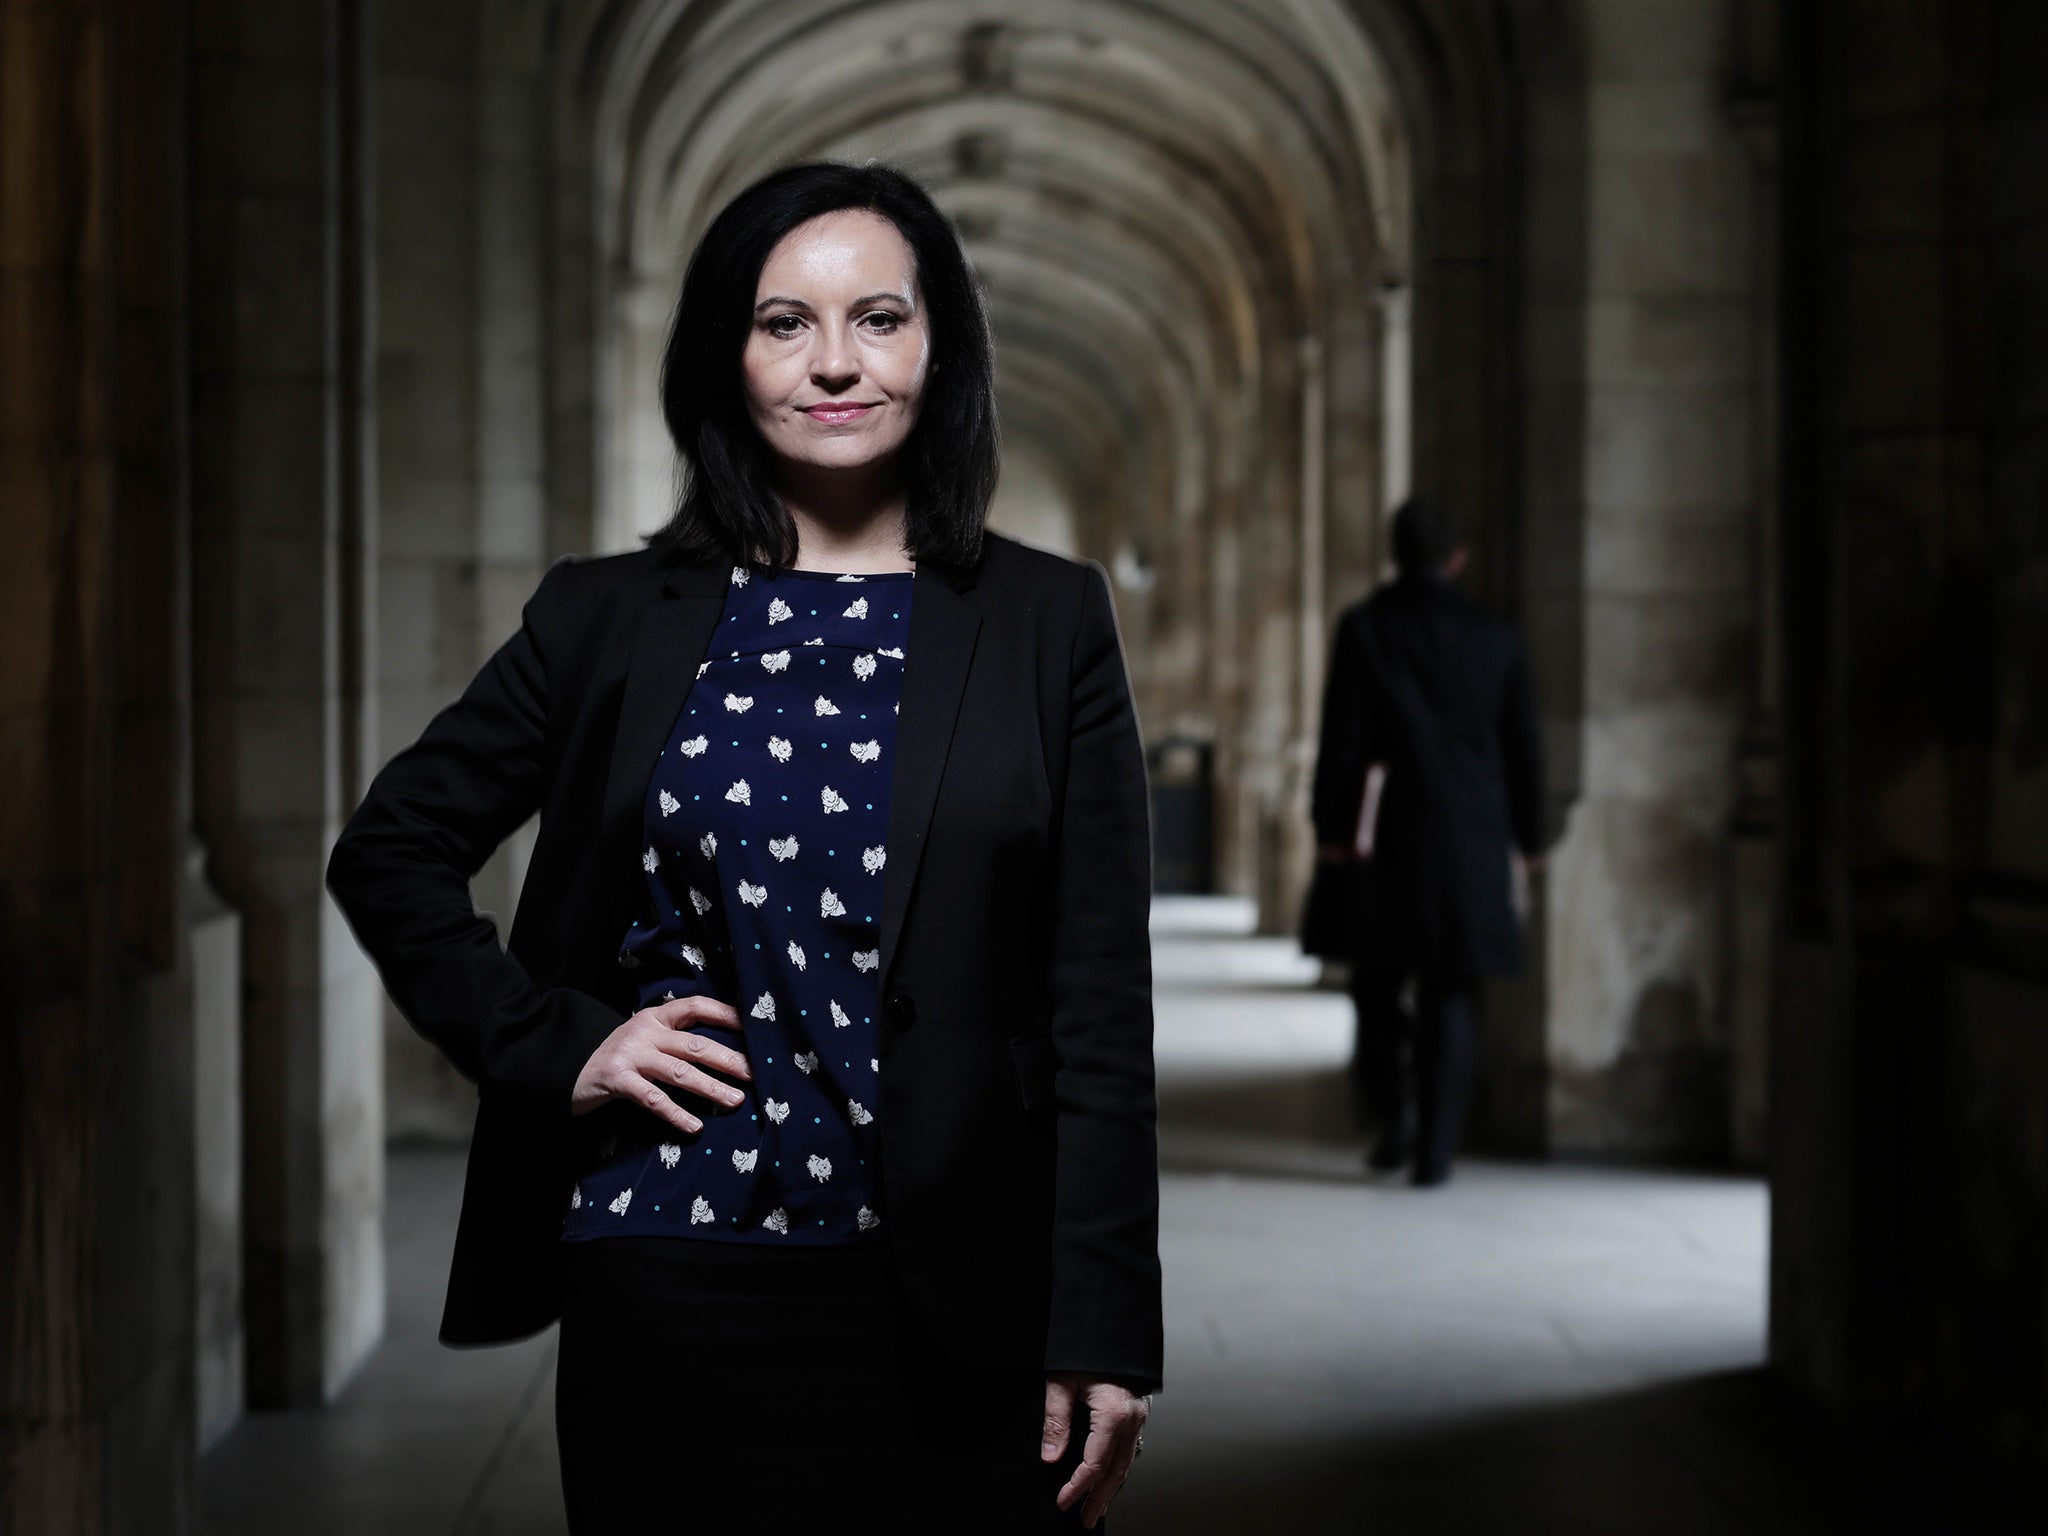 Caroline Flint MP, the shadow Secretary of State for Energy and Climate Change, says Ed Miliband has been subjected to some ‘pretty horrendous personal attacks’